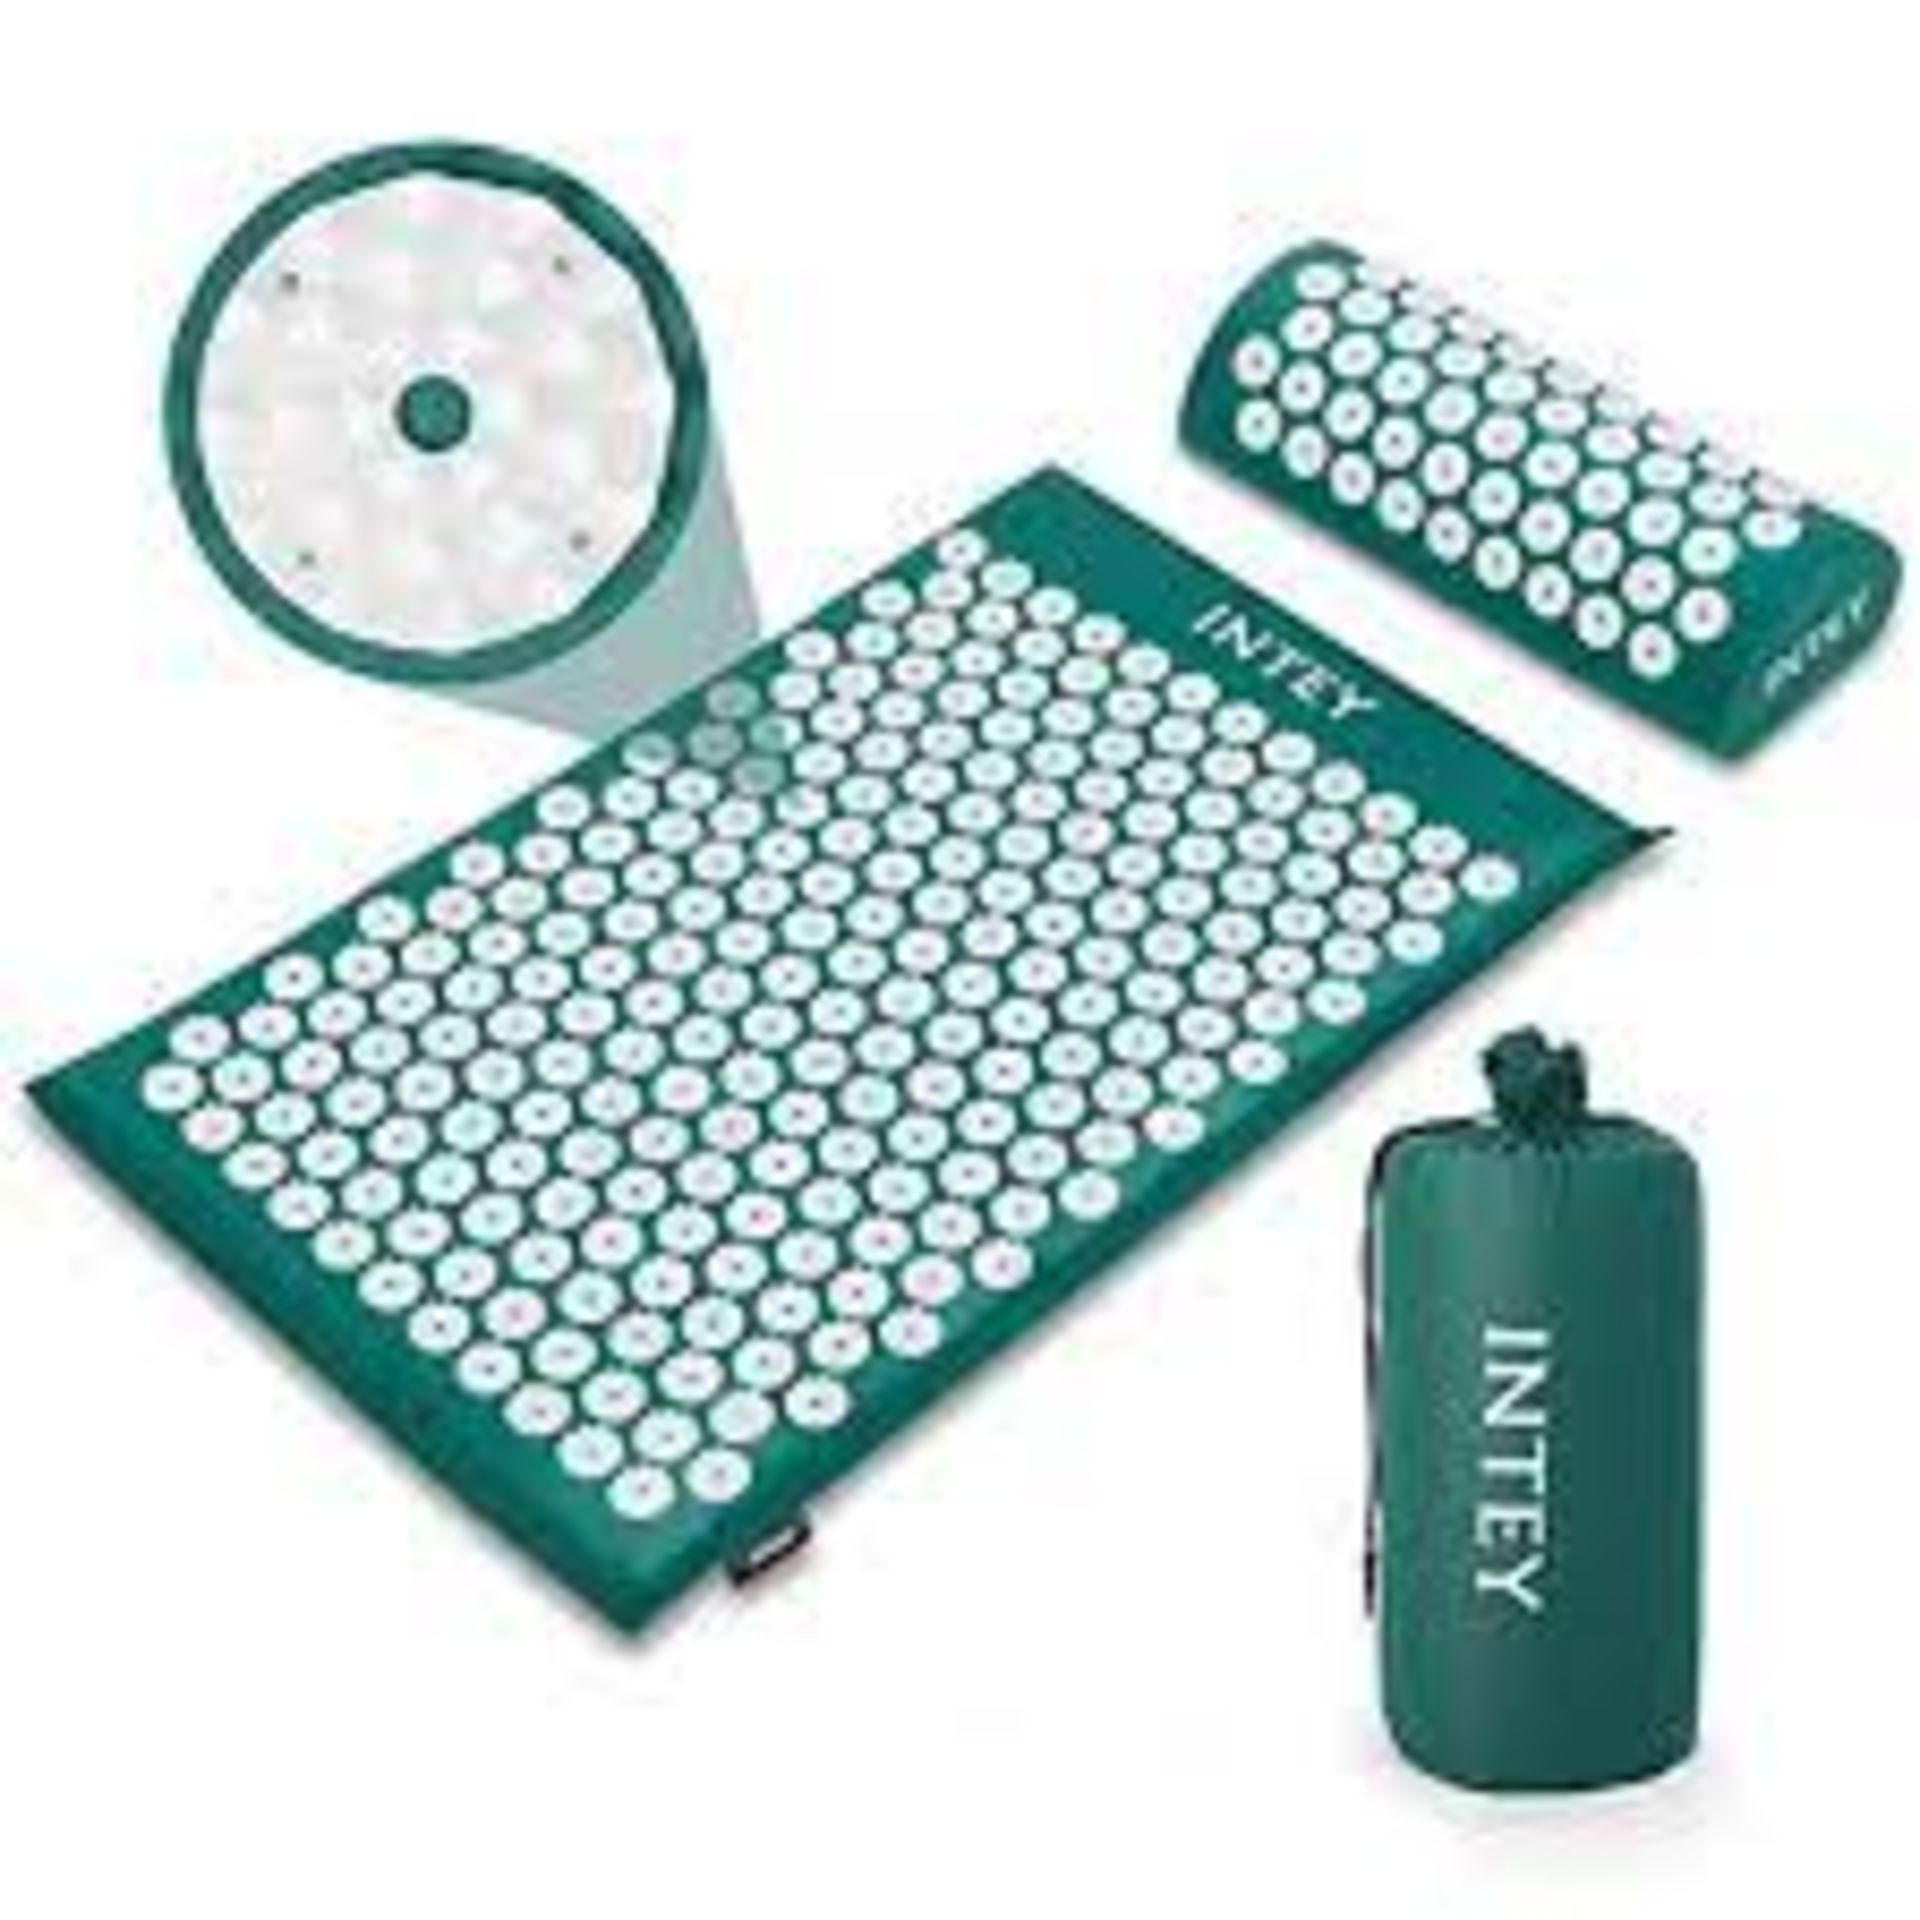 12 X BRAND NEW GREEN PROFESSIONAL ACUPUNCTURE PAD SETS WITH MAT AND PILLOW IN CARRY CASE RRP £30